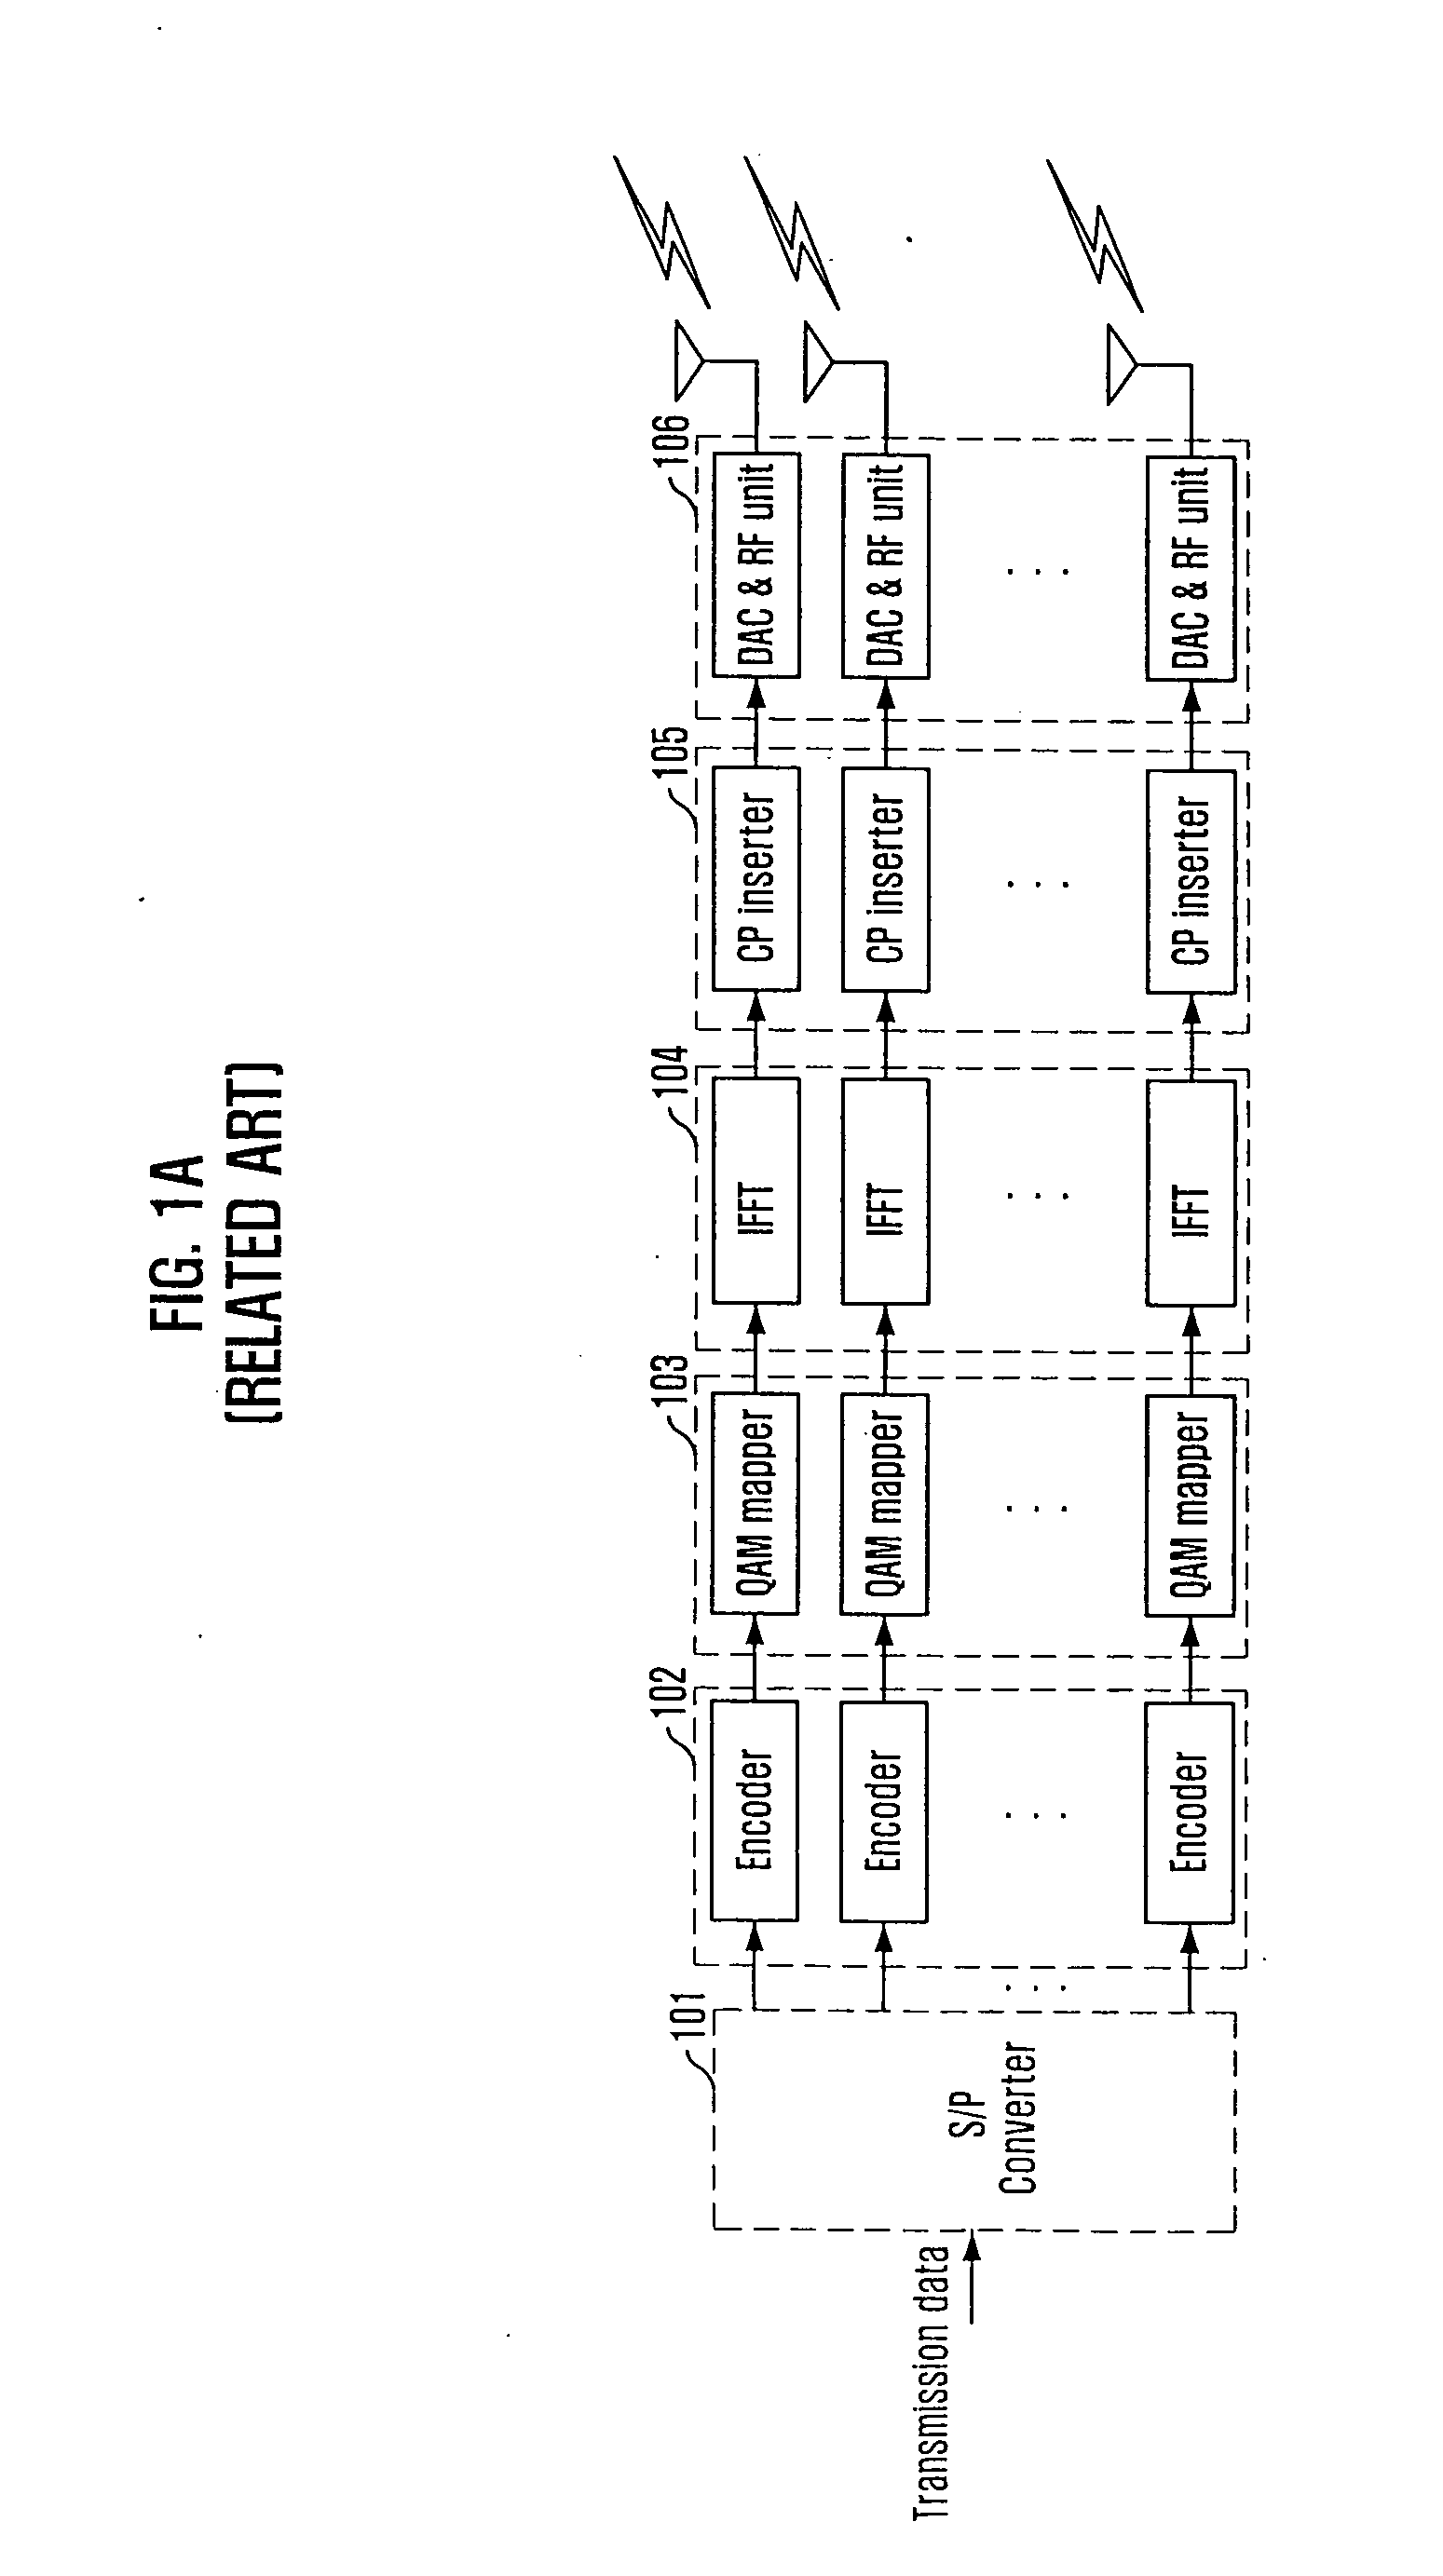 MIMO receiver, qr decomposition and multi-dimensional detection used in the MIMO receiver